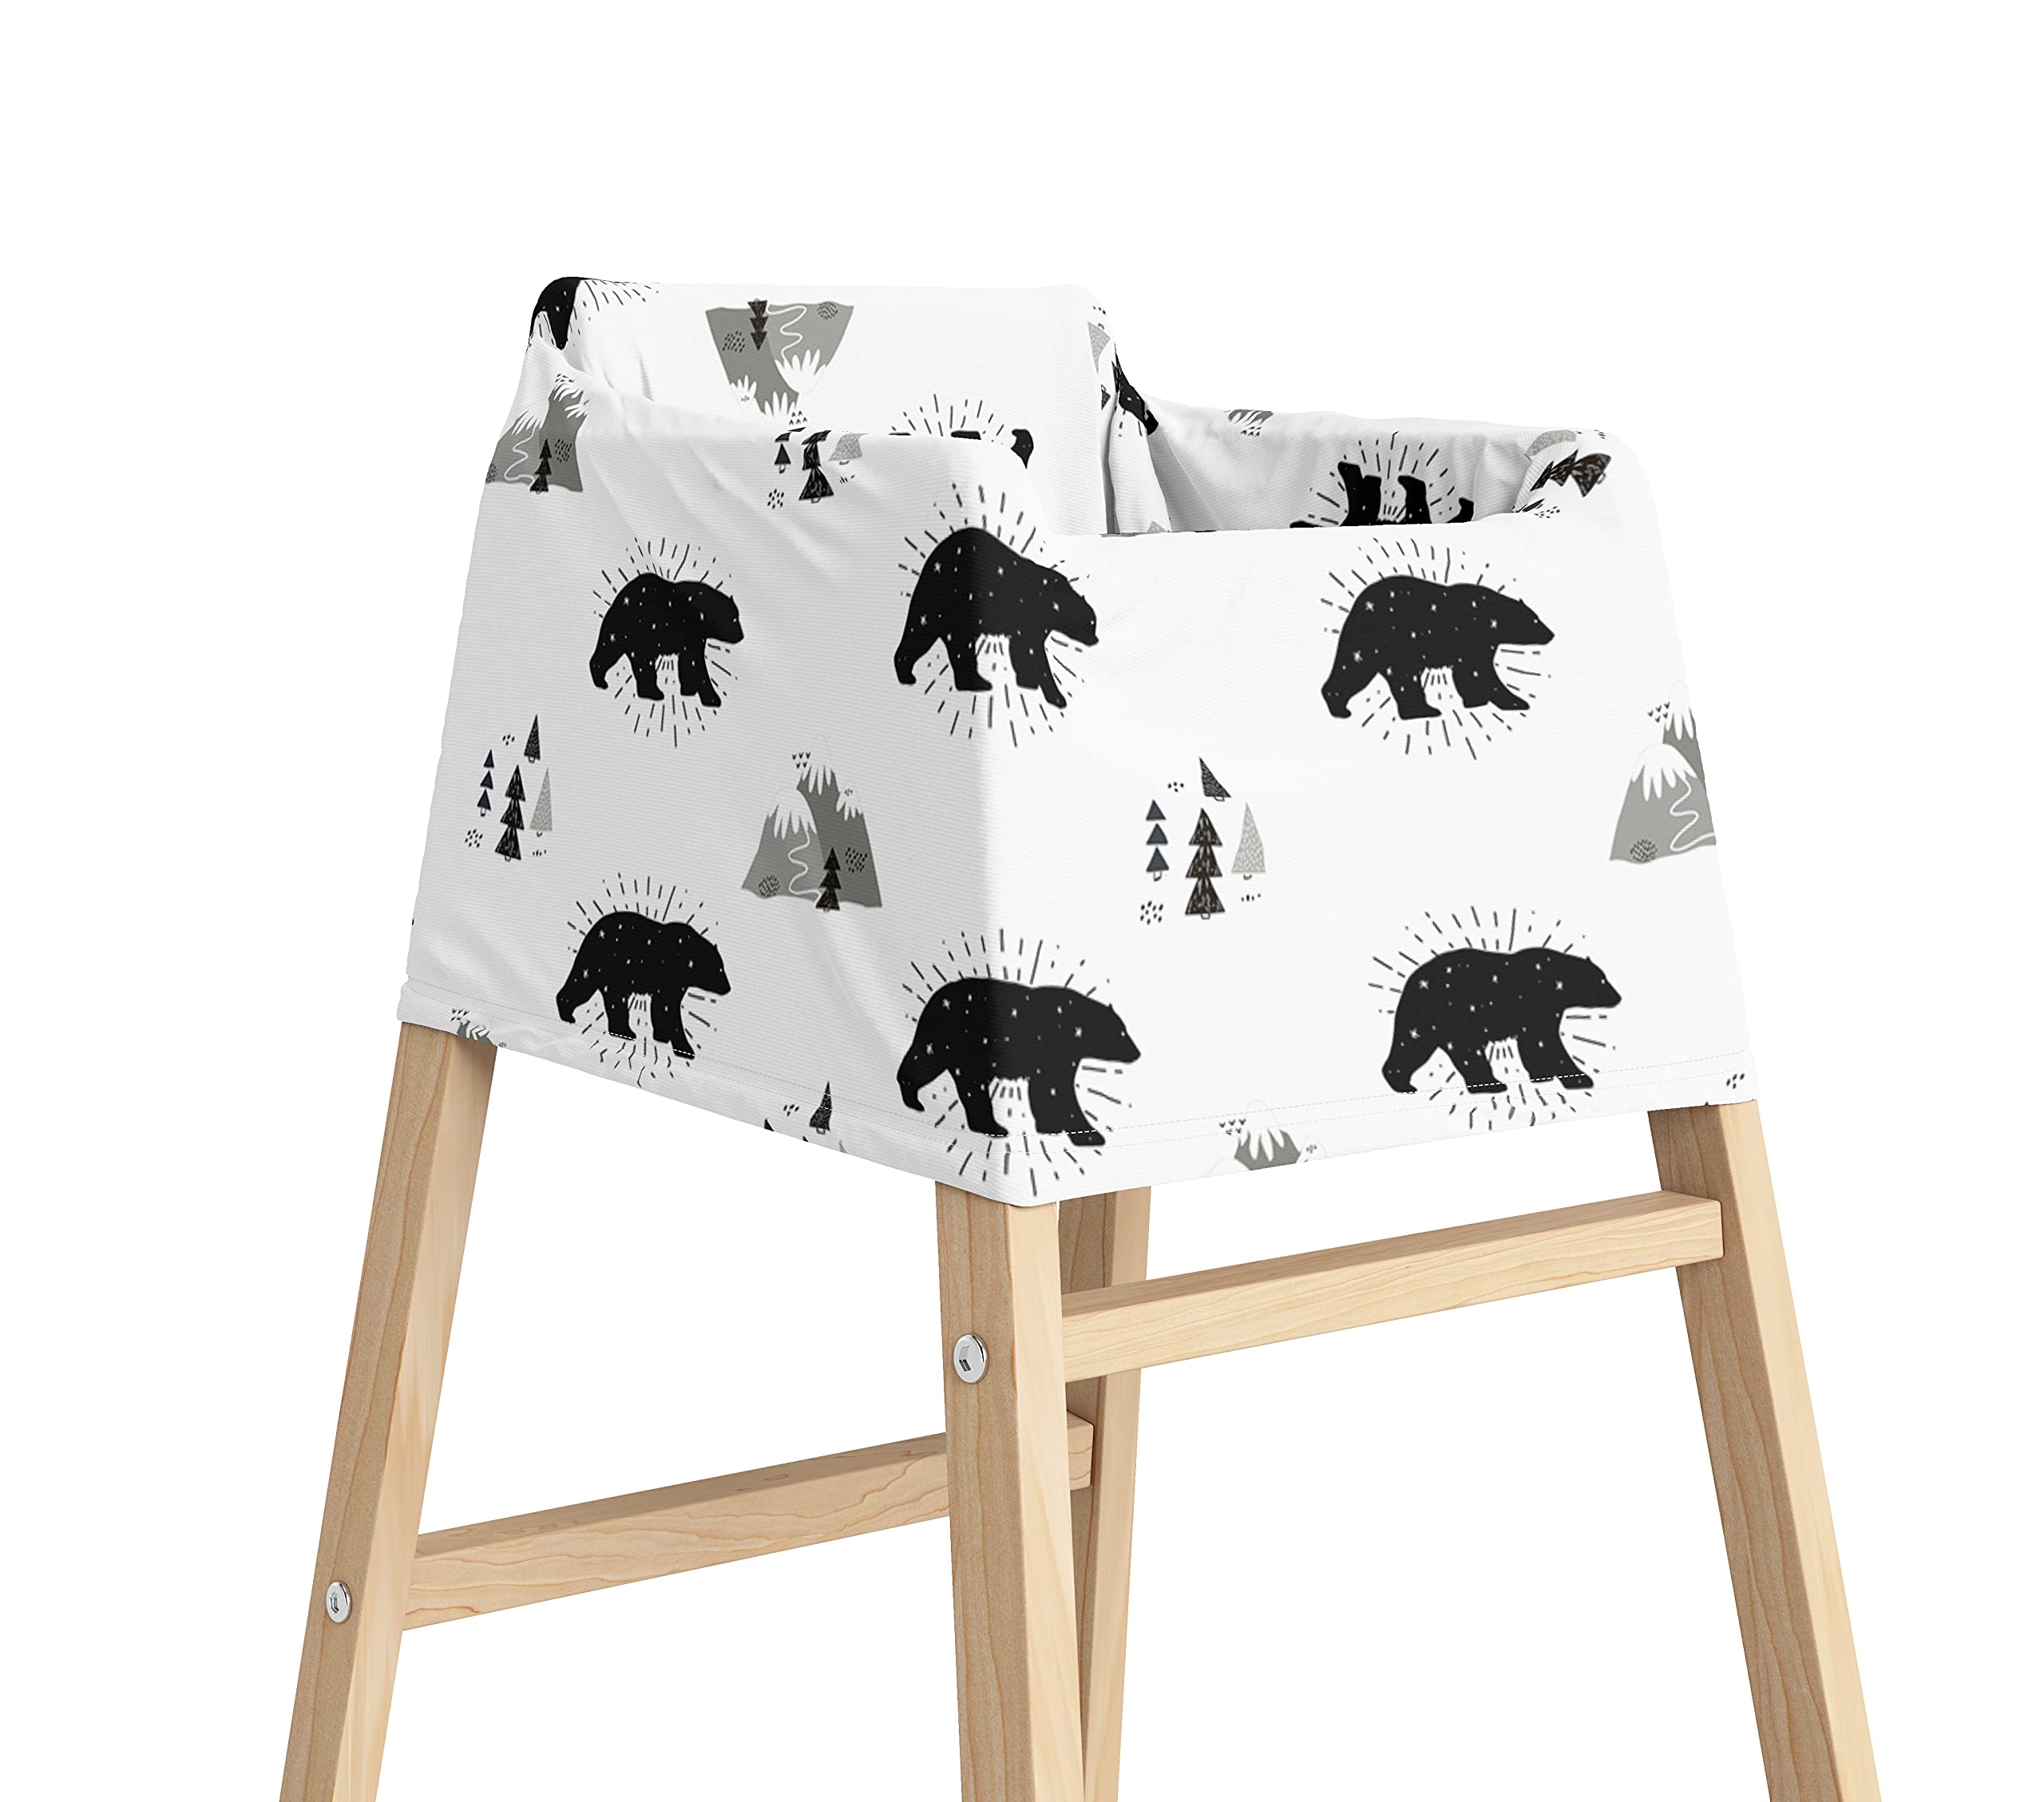 Stretchy Multi Use Cover Car Seat Canopy Woodland Bears Nursing Cover Shopping Cart Baby Cover